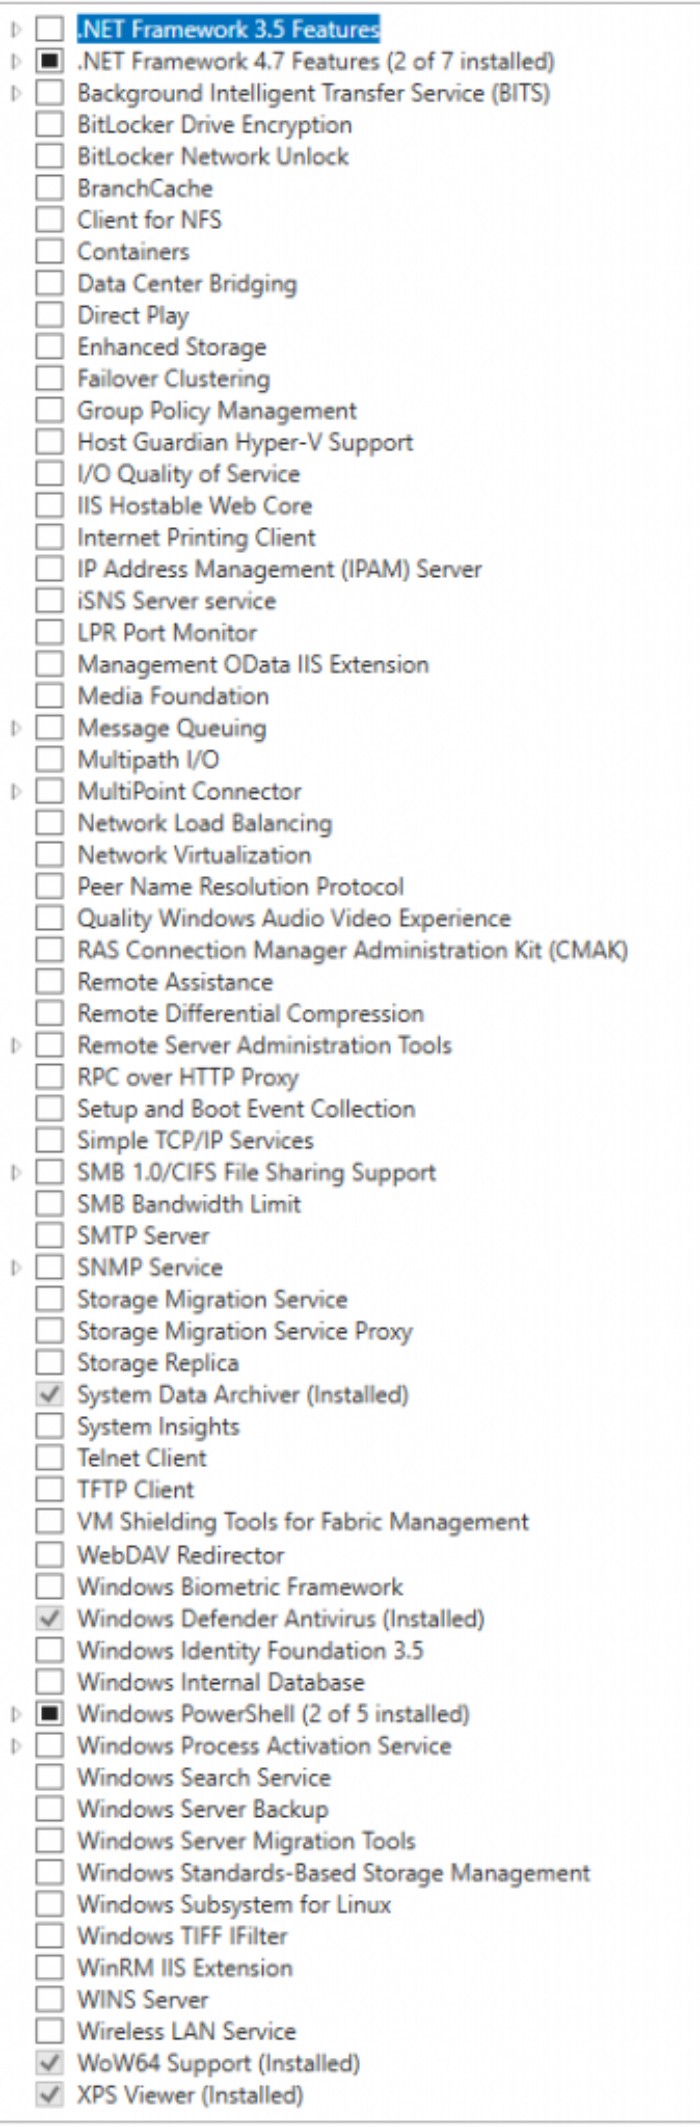 Key Roles and Features in Windows Server 2019 Essentials 5